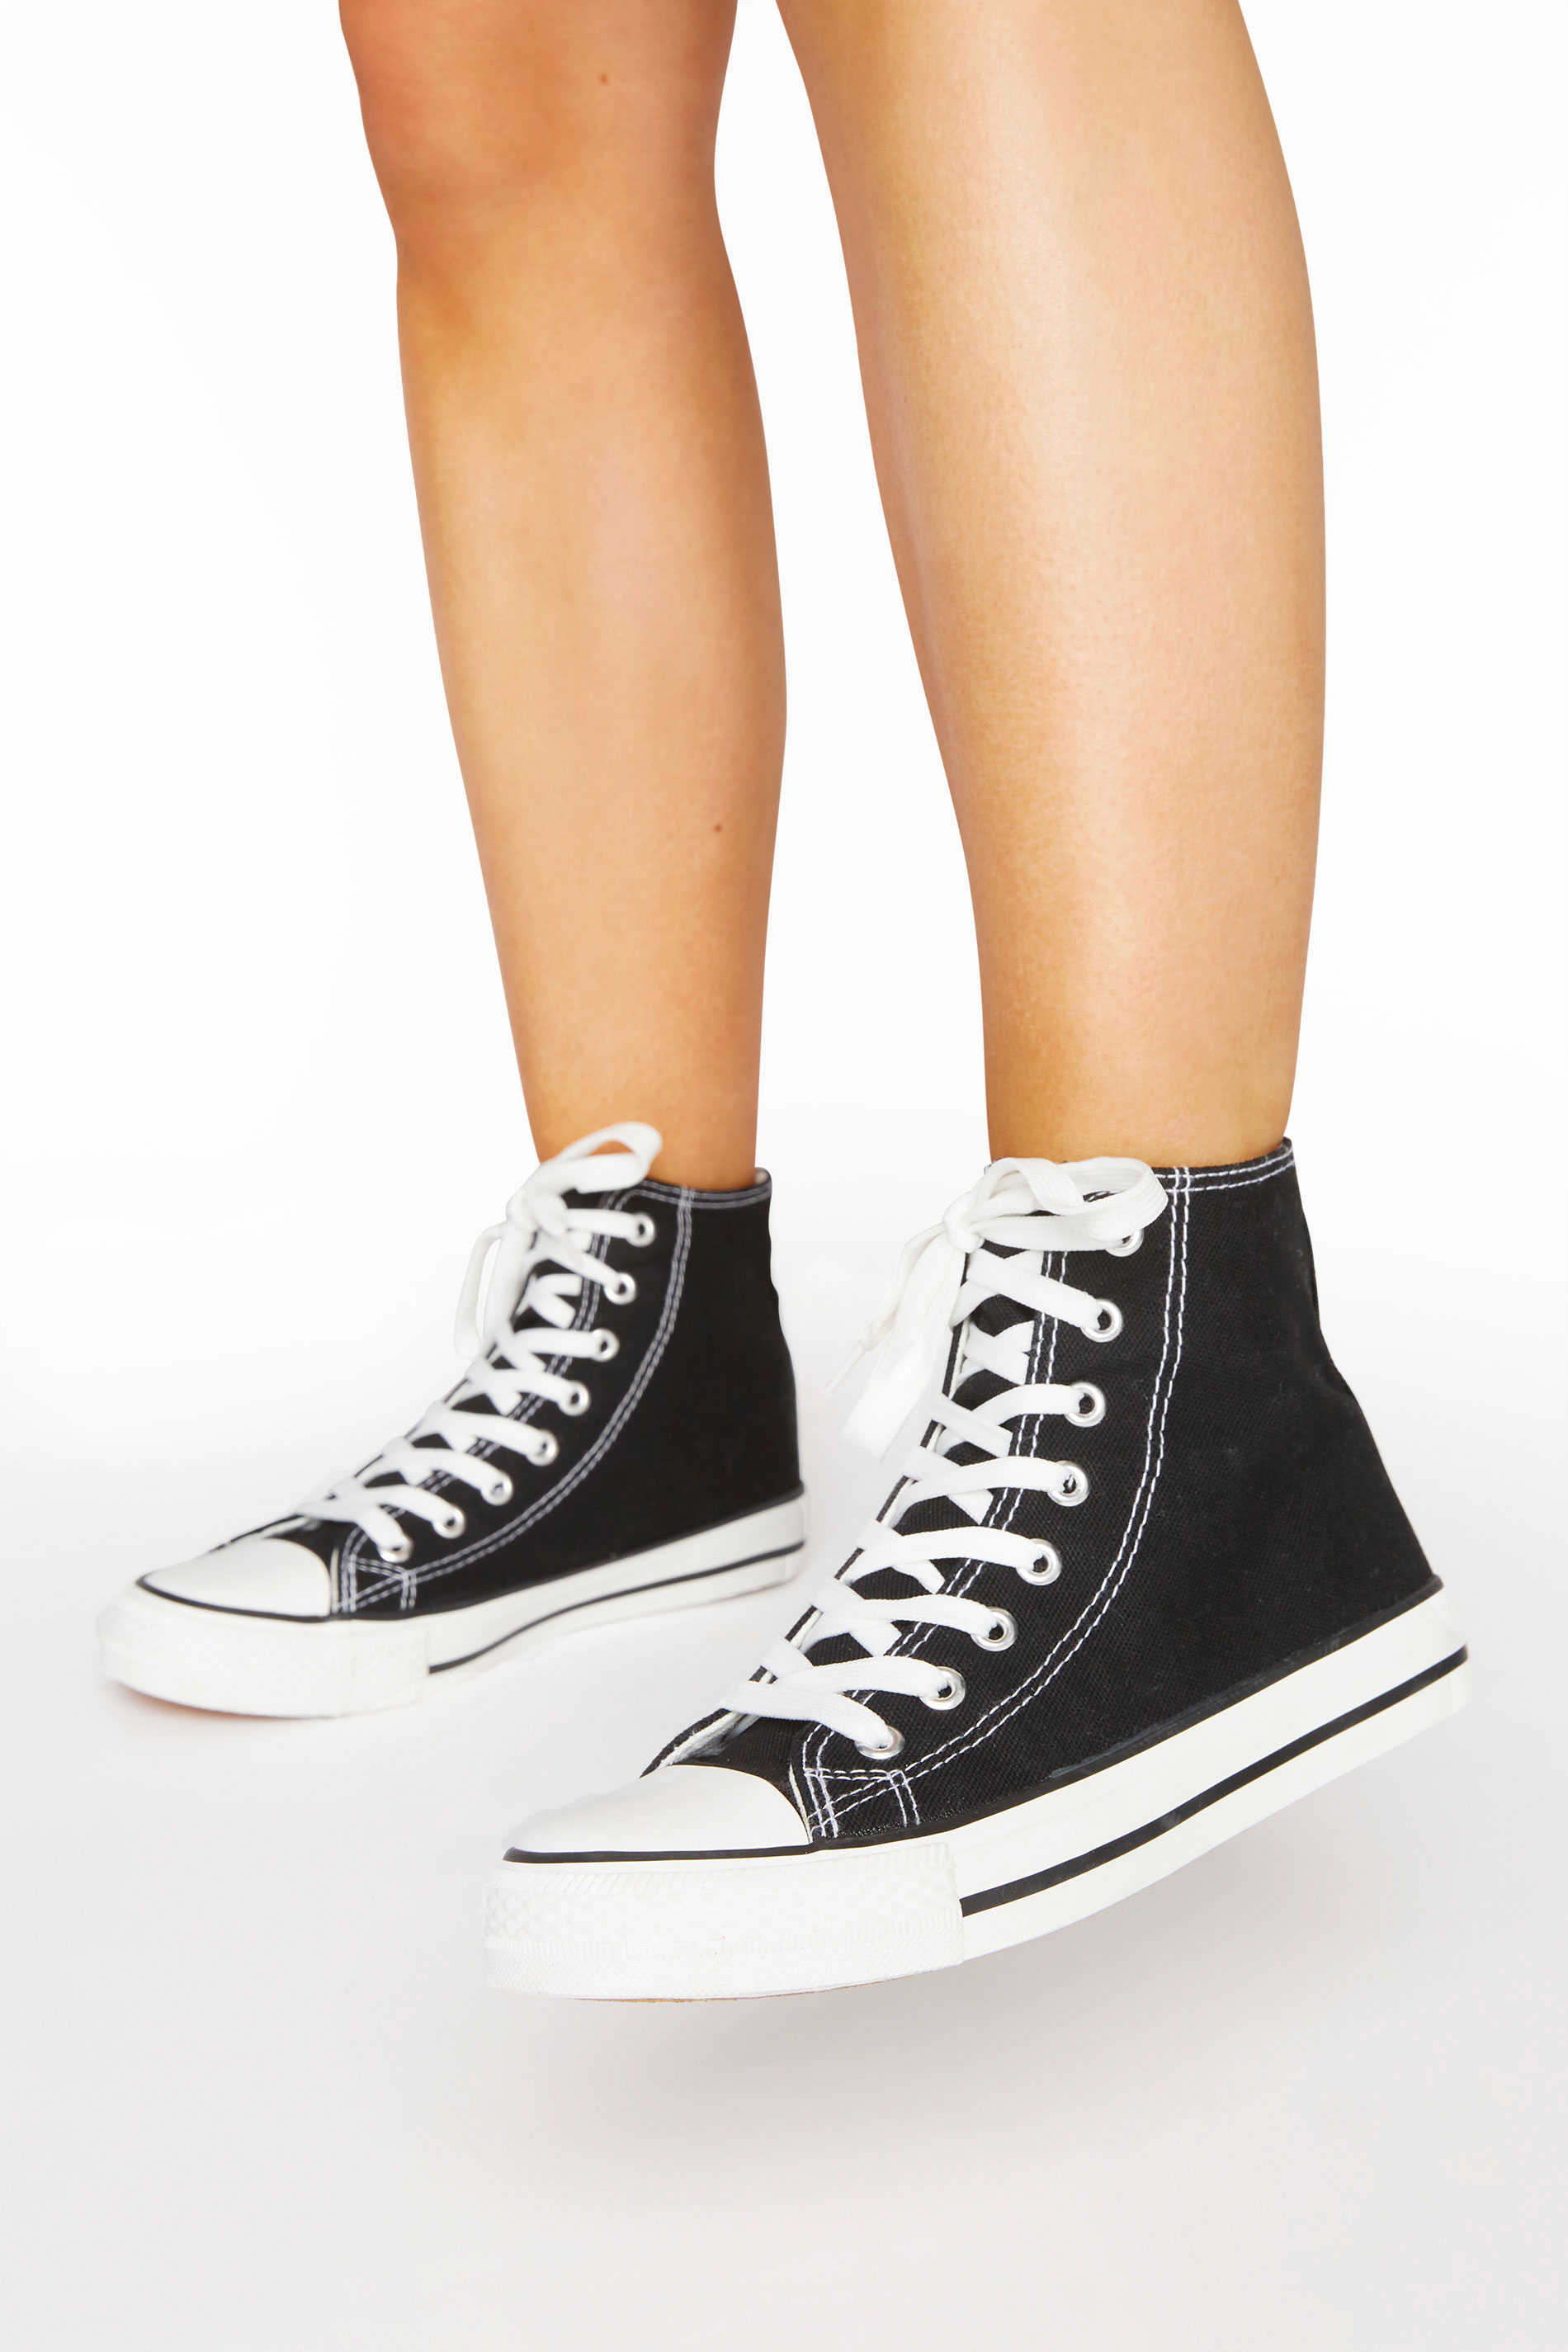 Black Canvas High Top Trainers In Wide Fit | Yours Clothing 1